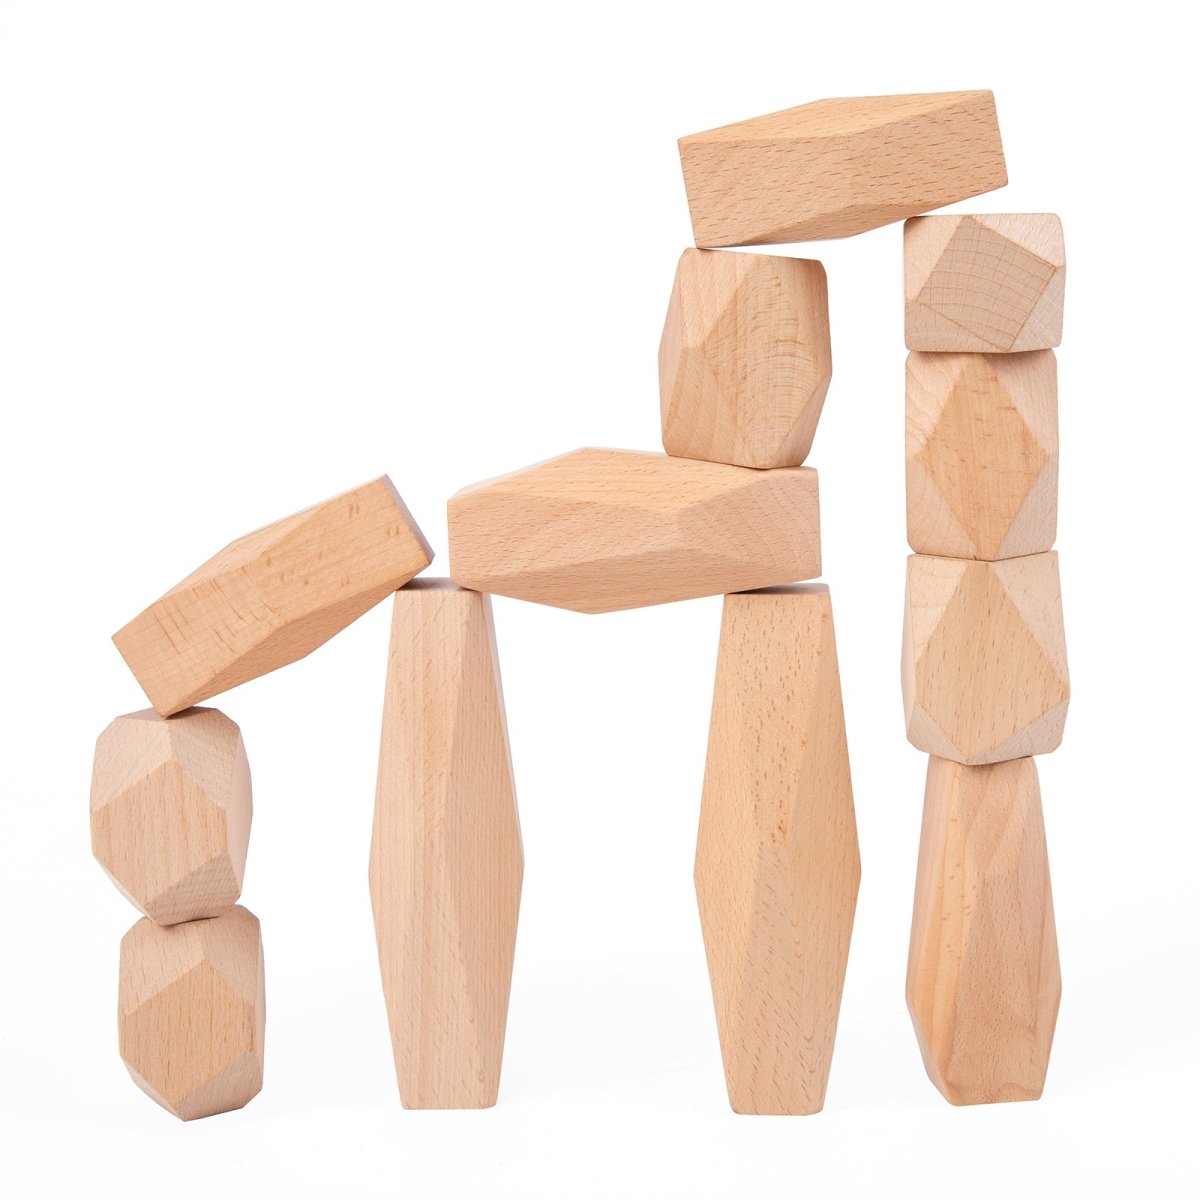 Jumbo Wooden Stacking Stones - Jumbo Wooden Stacking Stones - Curious Melodies